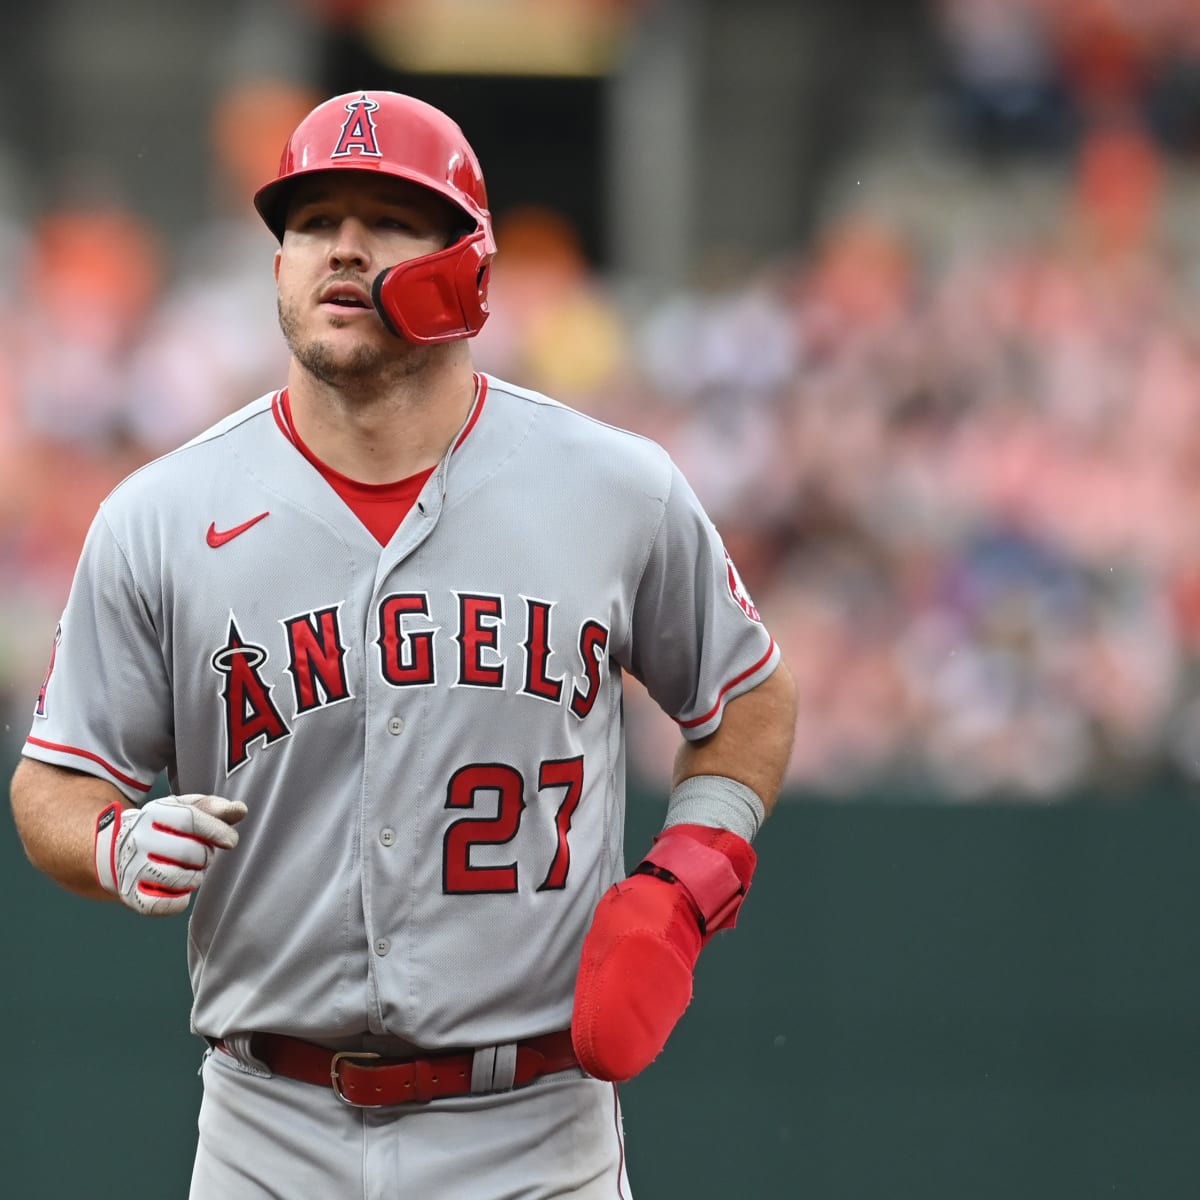 Los Angeles Angels' Superstar Mike Trout Will Do Whatever He Can